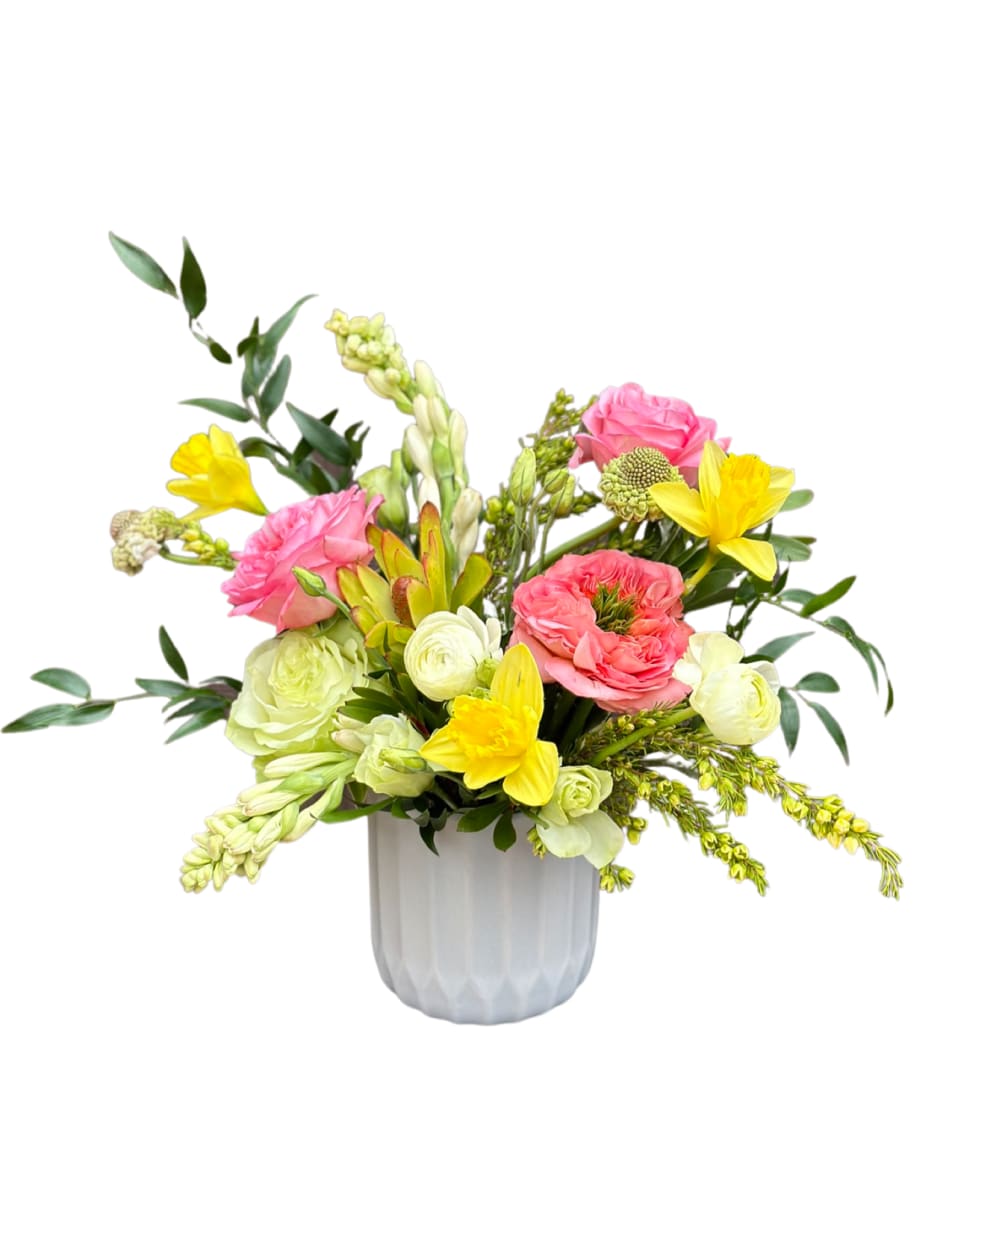 The Pink Lemonade arrangement is a stunning floral gift option, perfect for